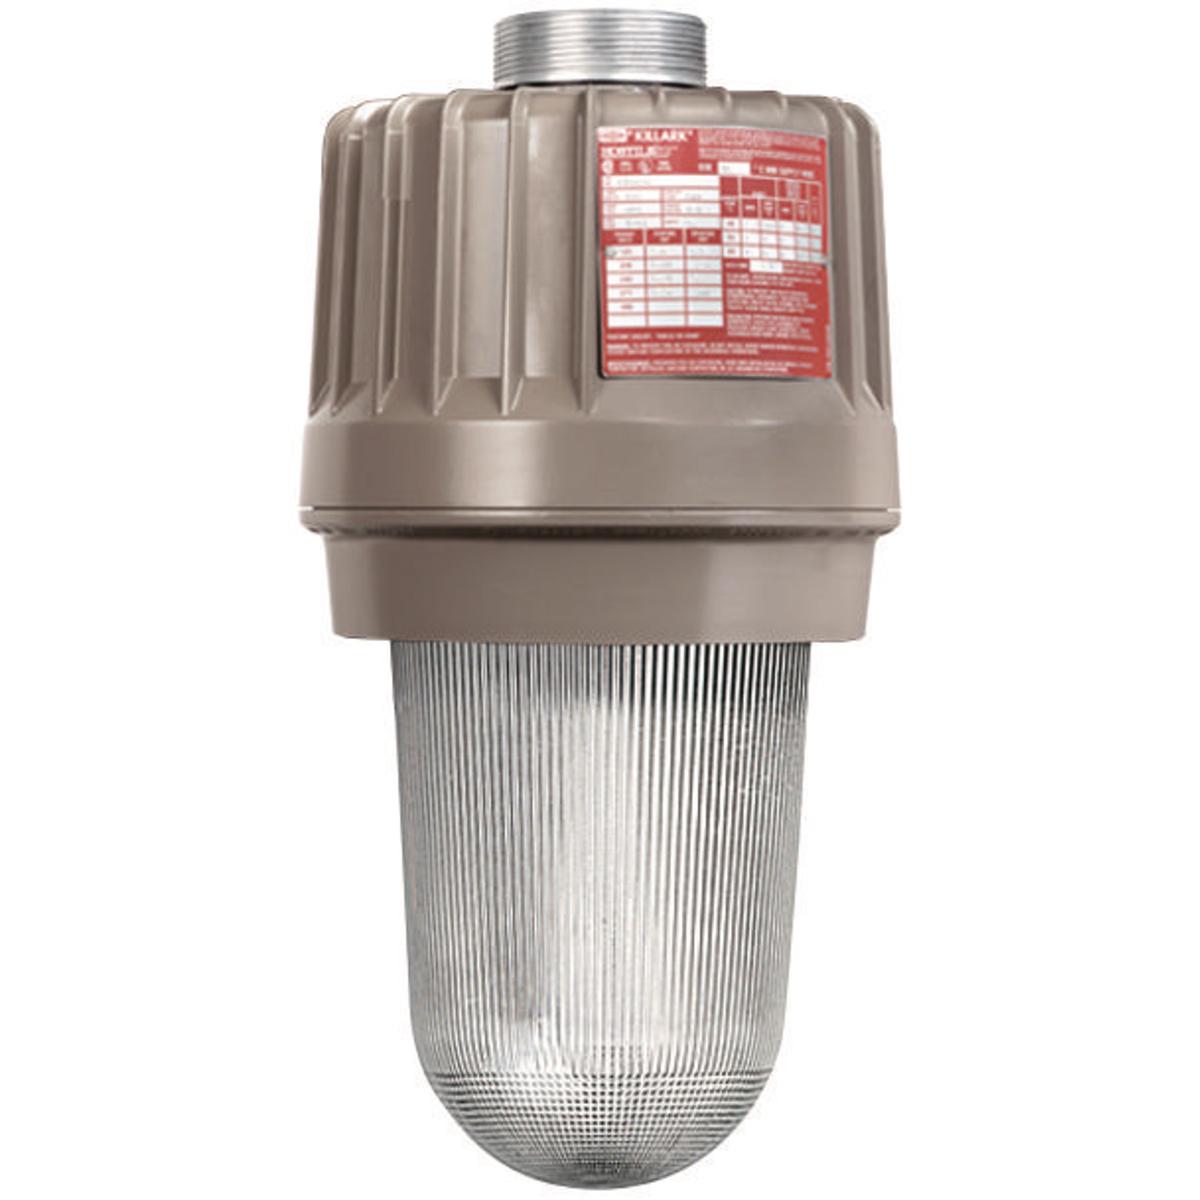 Hubbell EZP175 175W 480V Pulse-Start Metal Halide  ; Three light sources – High Pressure Sodium (50-400W), Metal Halide (70-400W) and Pulse Start Metal Halide (175-400W) ; Mounting choice –Pendant, ceiling, 25˚ stanchion or 90˚ wall mount, all with “wireless” design tha